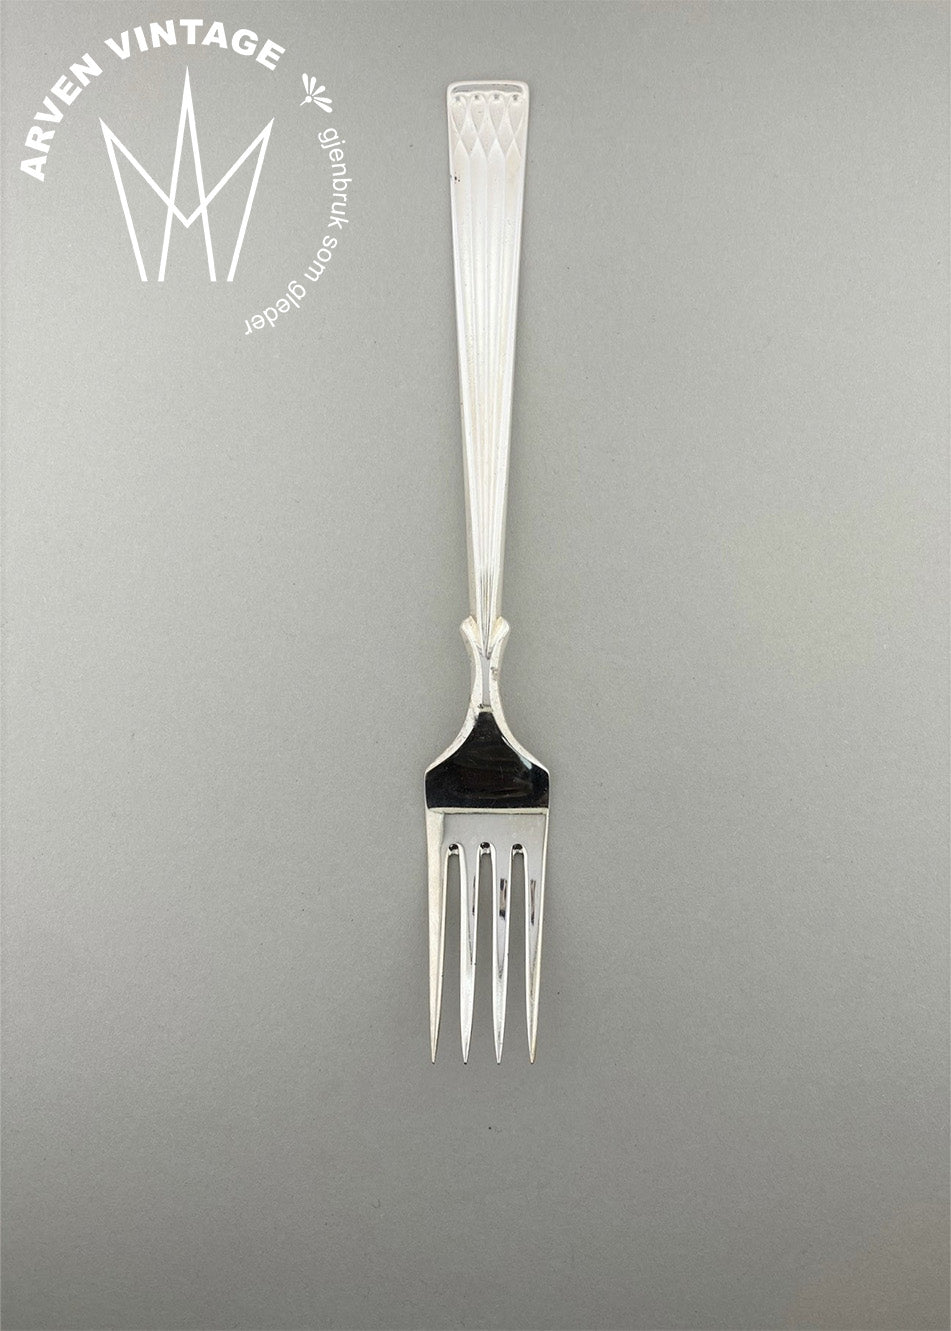 Vintage Heirloom silver small dining fork